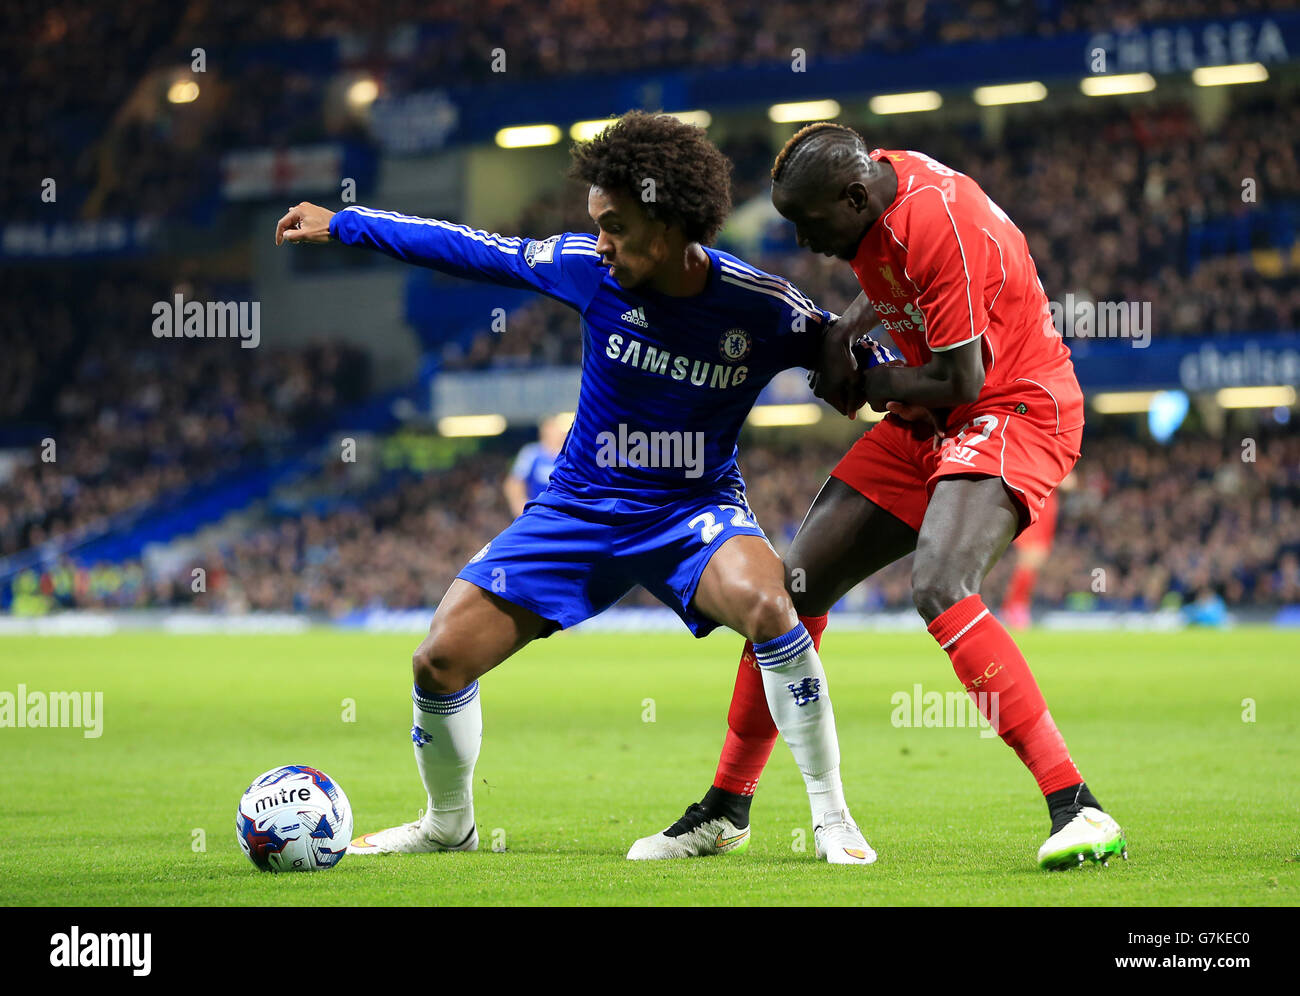 Chelsea's Willian (left) and Liverpool's Mamadou Sakho battle for the ball during the Capital One Cup Semi Final, Second Leg match at Stamford Bridge, London. PRESS ASSOCIATION Photo. Picture date: Tuesday January 27, 2015. See PA story: SOCCER Chelsea. Photo credit should read: Nick Potts/PA Wire. RESTRICTIONS: Maximum 45 images during a match. No video emulation or promotion as 'live'. No use in games, competitions, merchandise, betting or single club/player services. No use with unofficial audio, video, data, fixtures or club/league Stock Photo